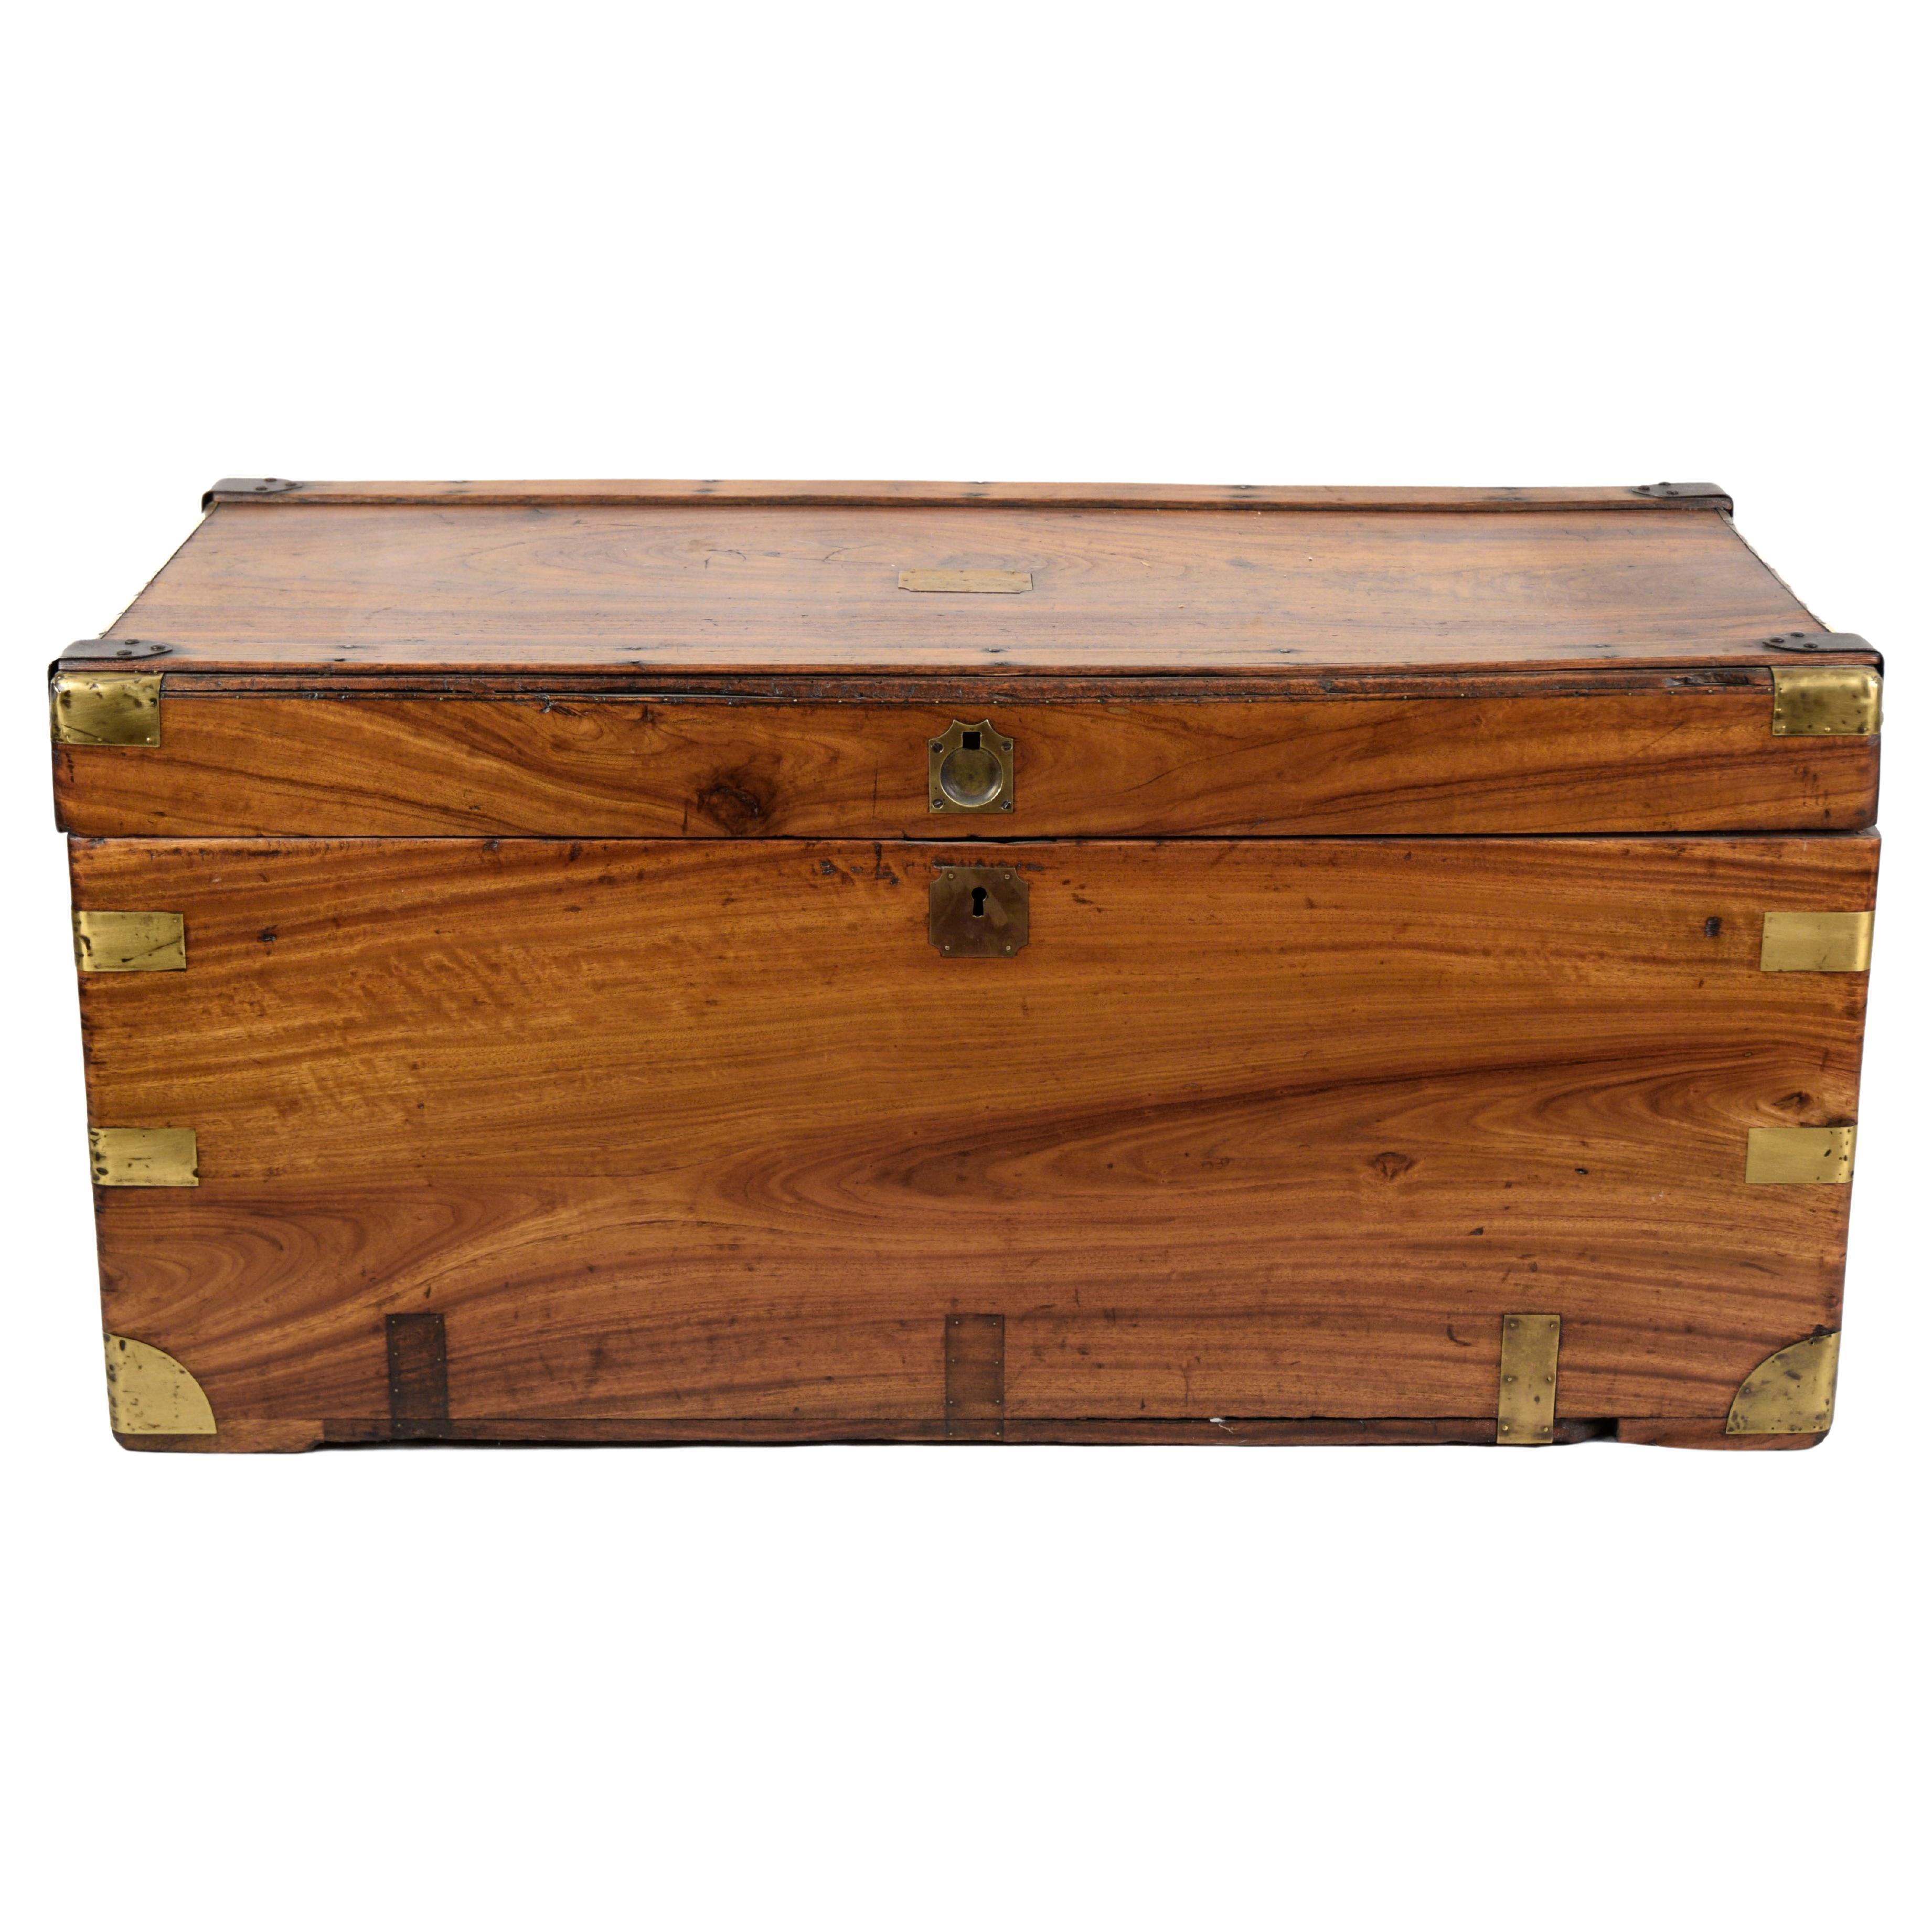 Camphorwood Campaign Chest - Late 19th Century Chinese Export R.B. Van Cleve, NY For Sale